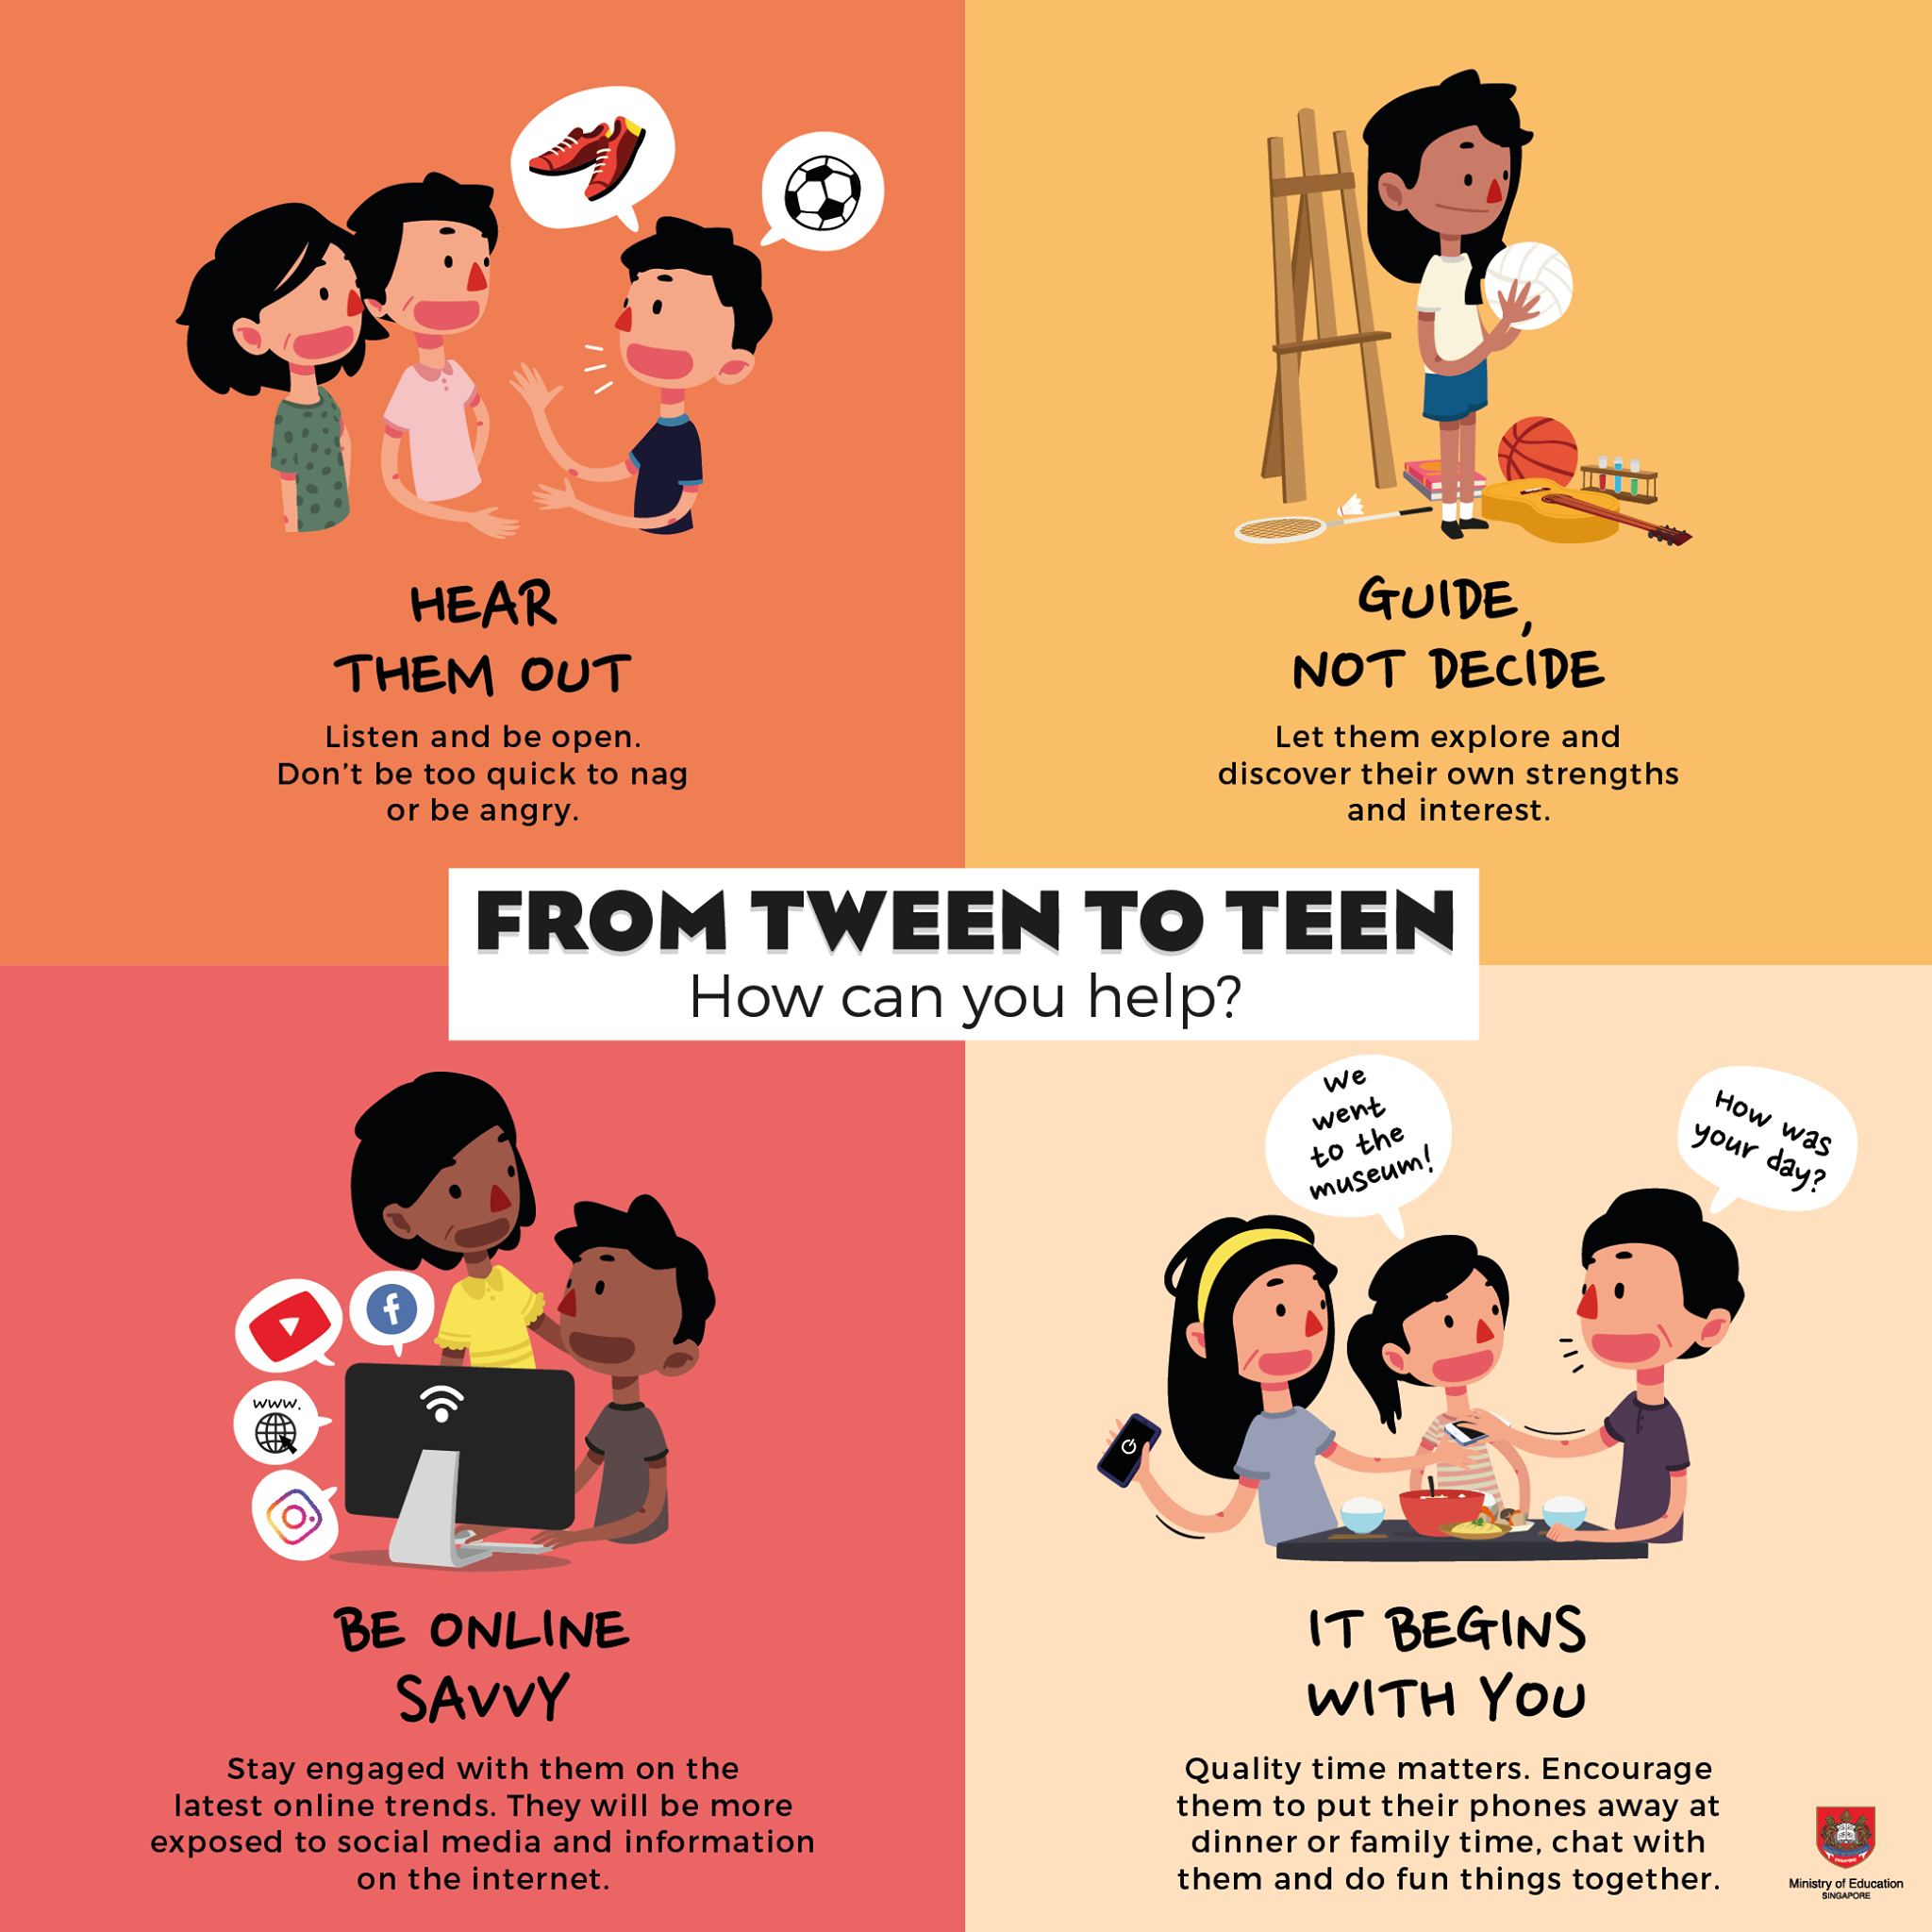 From tween to teen: How can you help?